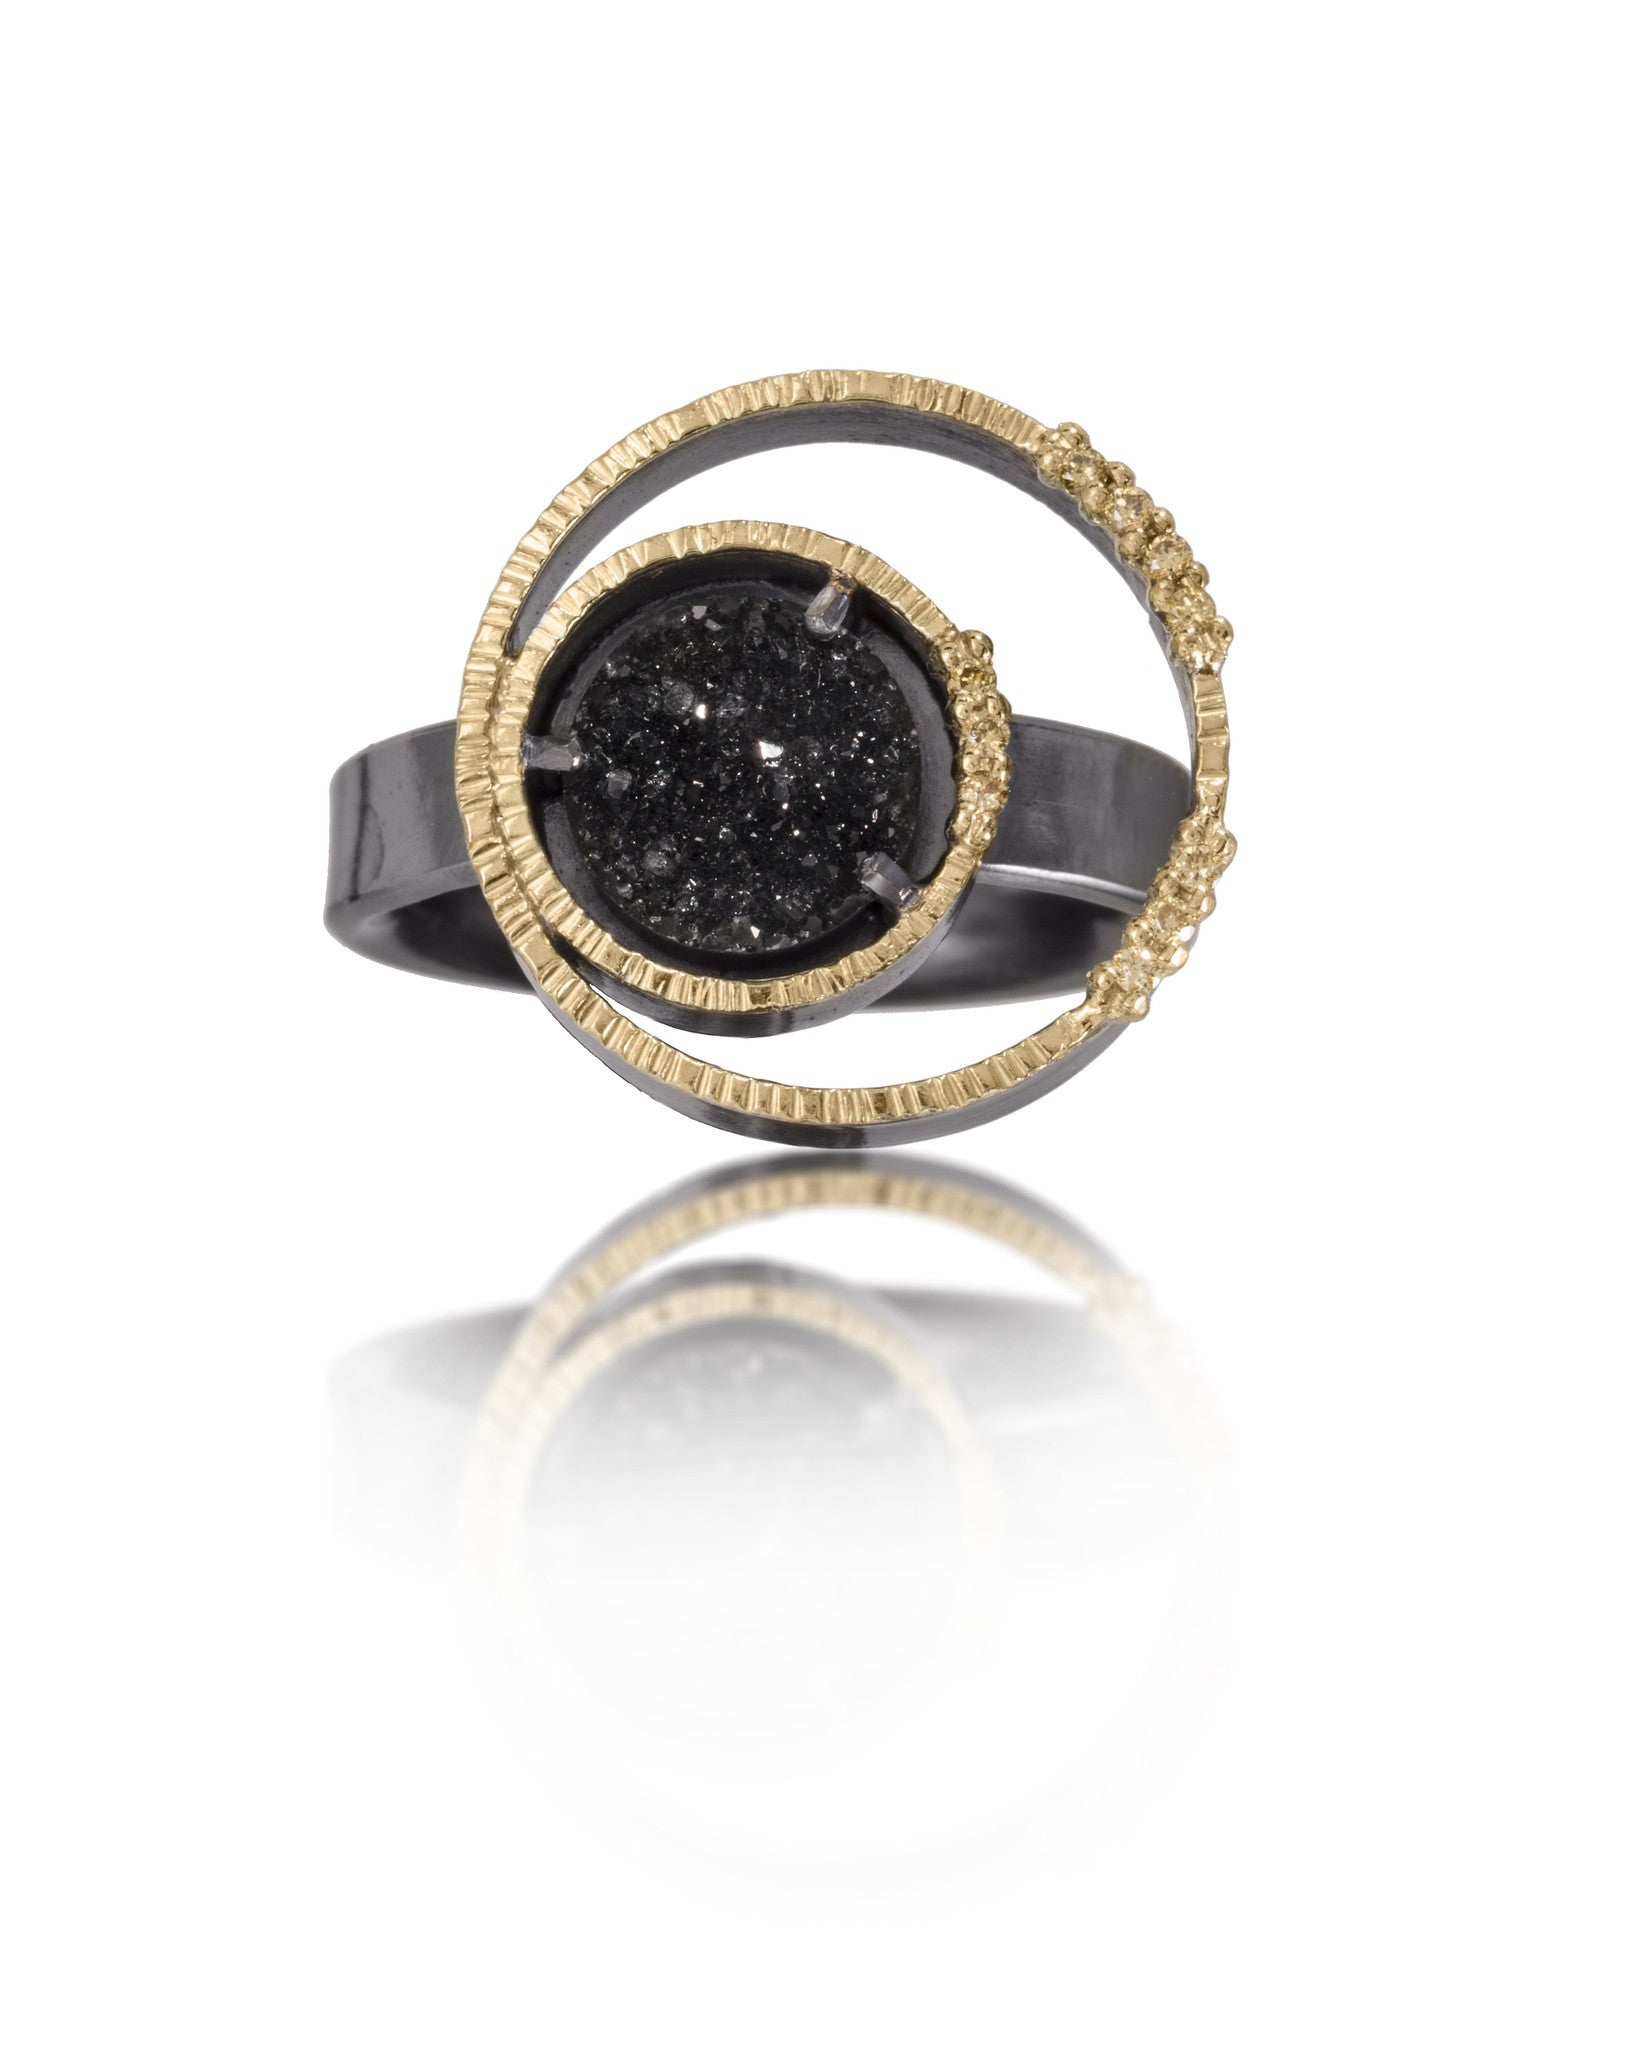 Spiral Ring #2 in 18k gold backed with oxidized sterling silver, prong set black drusy and natural yellow diamonds. Hand fabricated, hammer textured. Comfort band. 8mm black drusy.